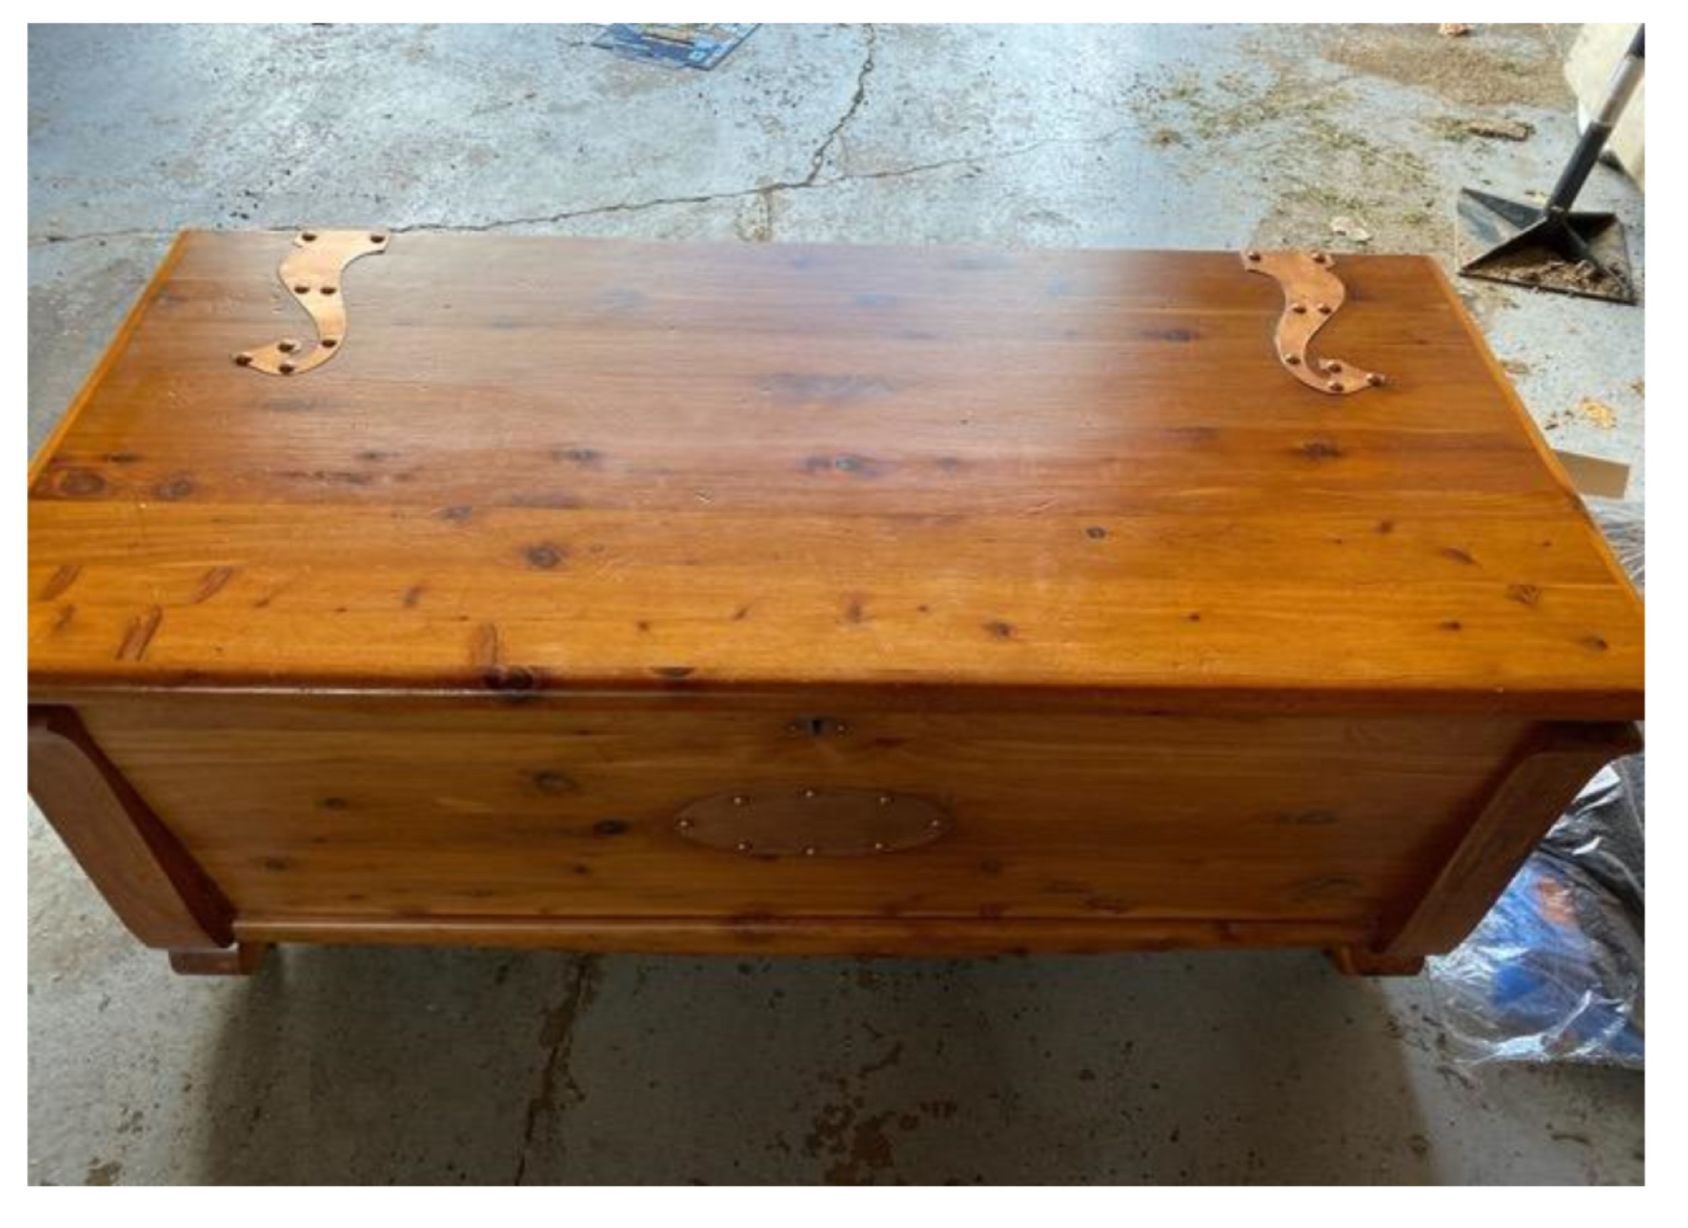 Treasures in Your Attic Cedar chest is useful and attractive, but wont fetch huge money Columns unionleader